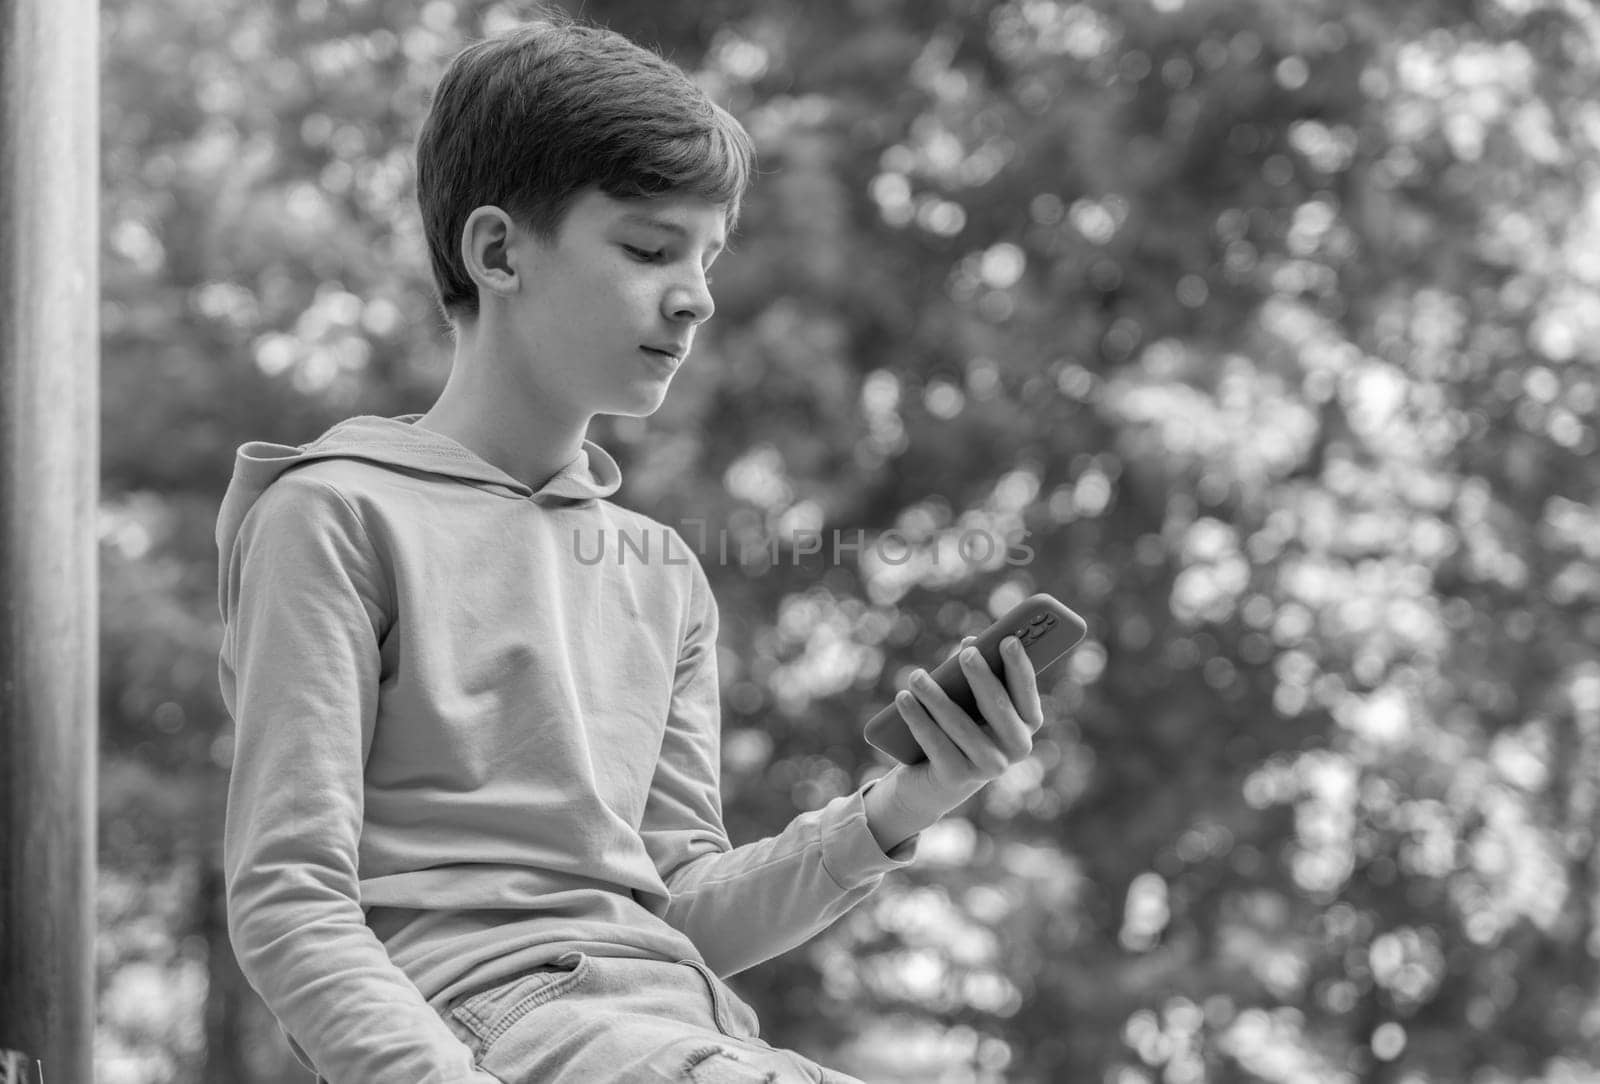 Teenager sitting outdoors with smartphone by Ri6ka